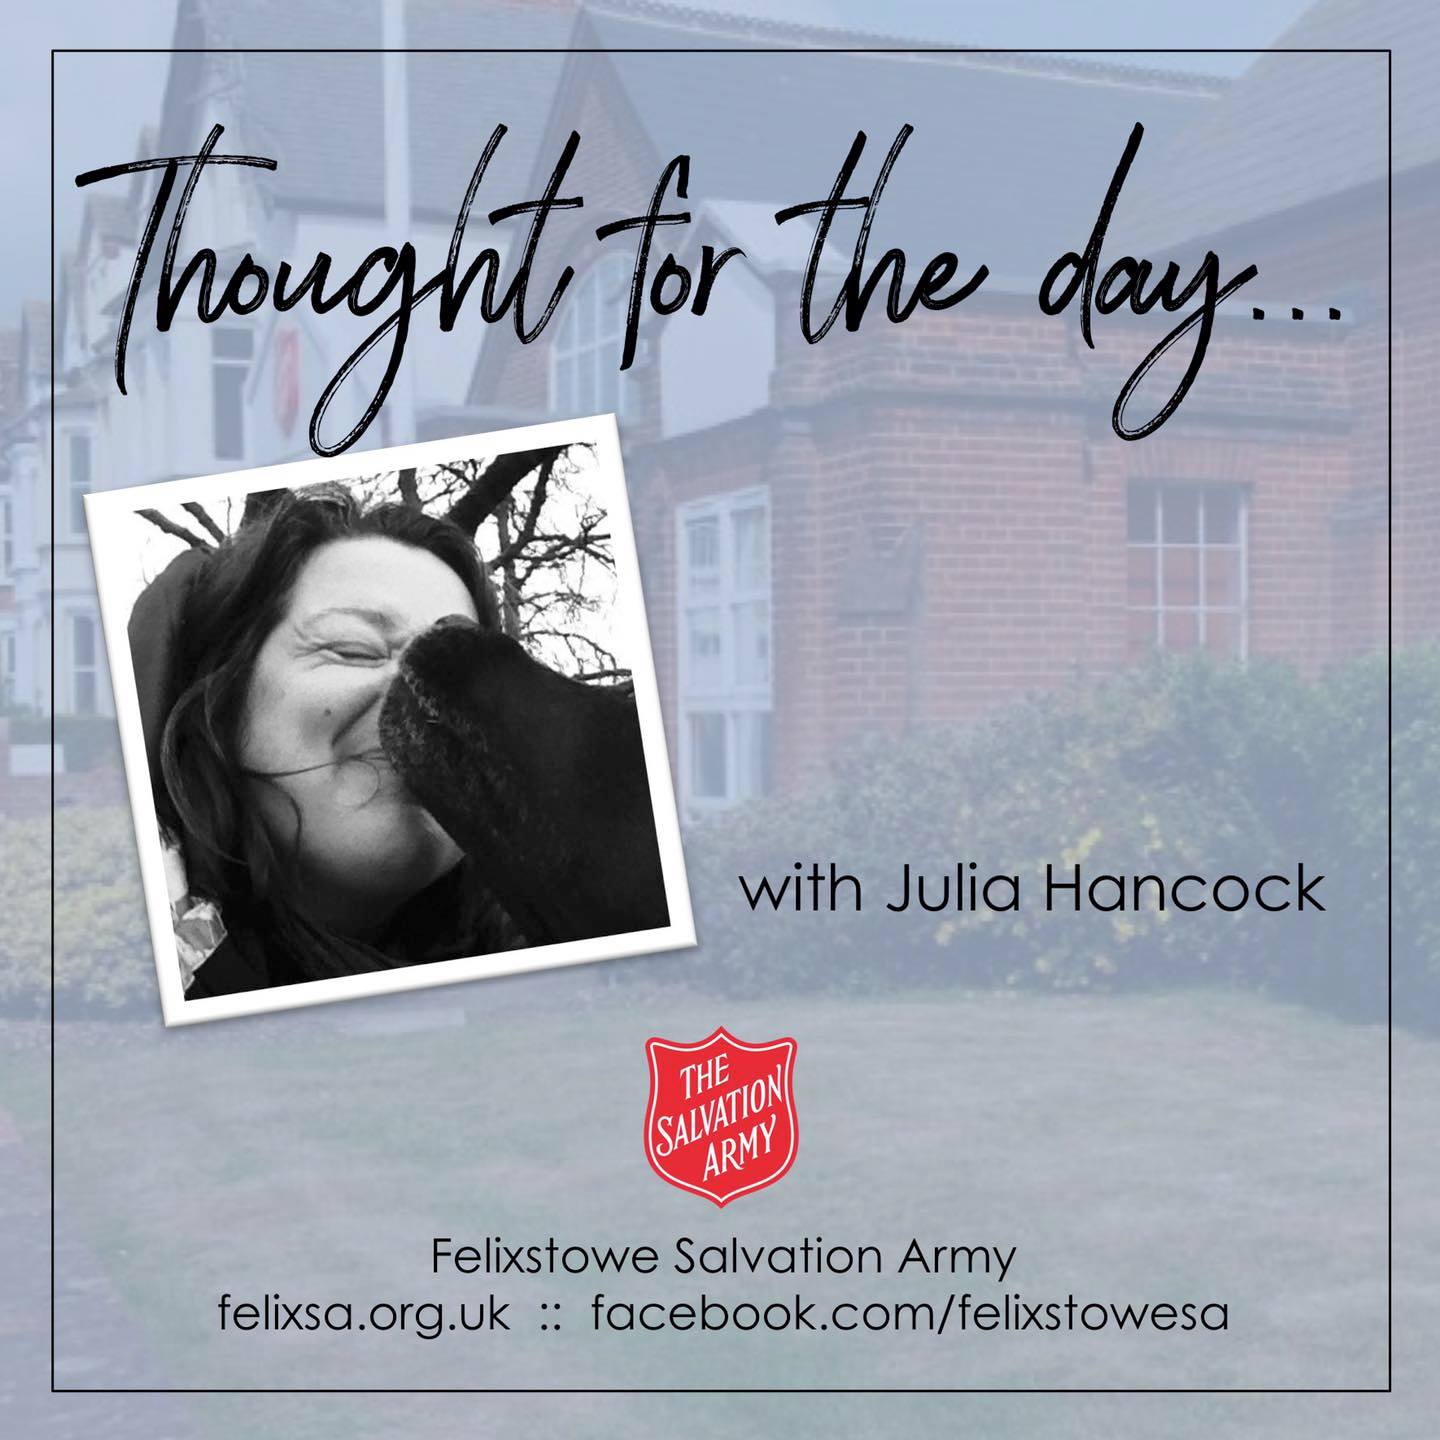 Thought for the Day with Julia Hancock